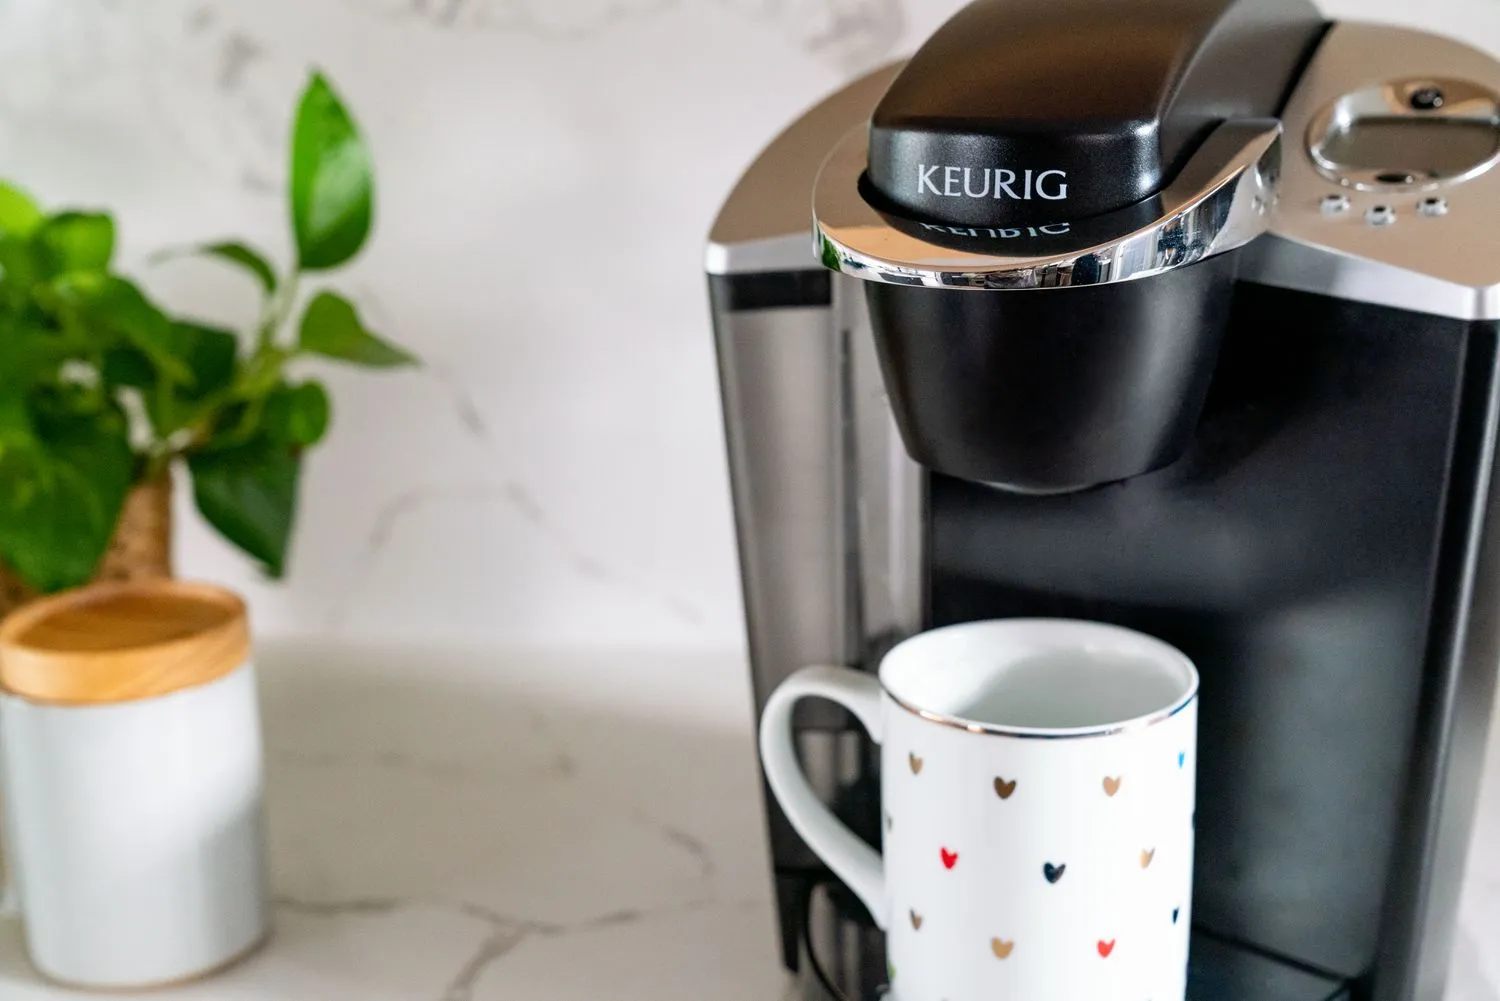 How to Clean Your Keurig Coffee Maker